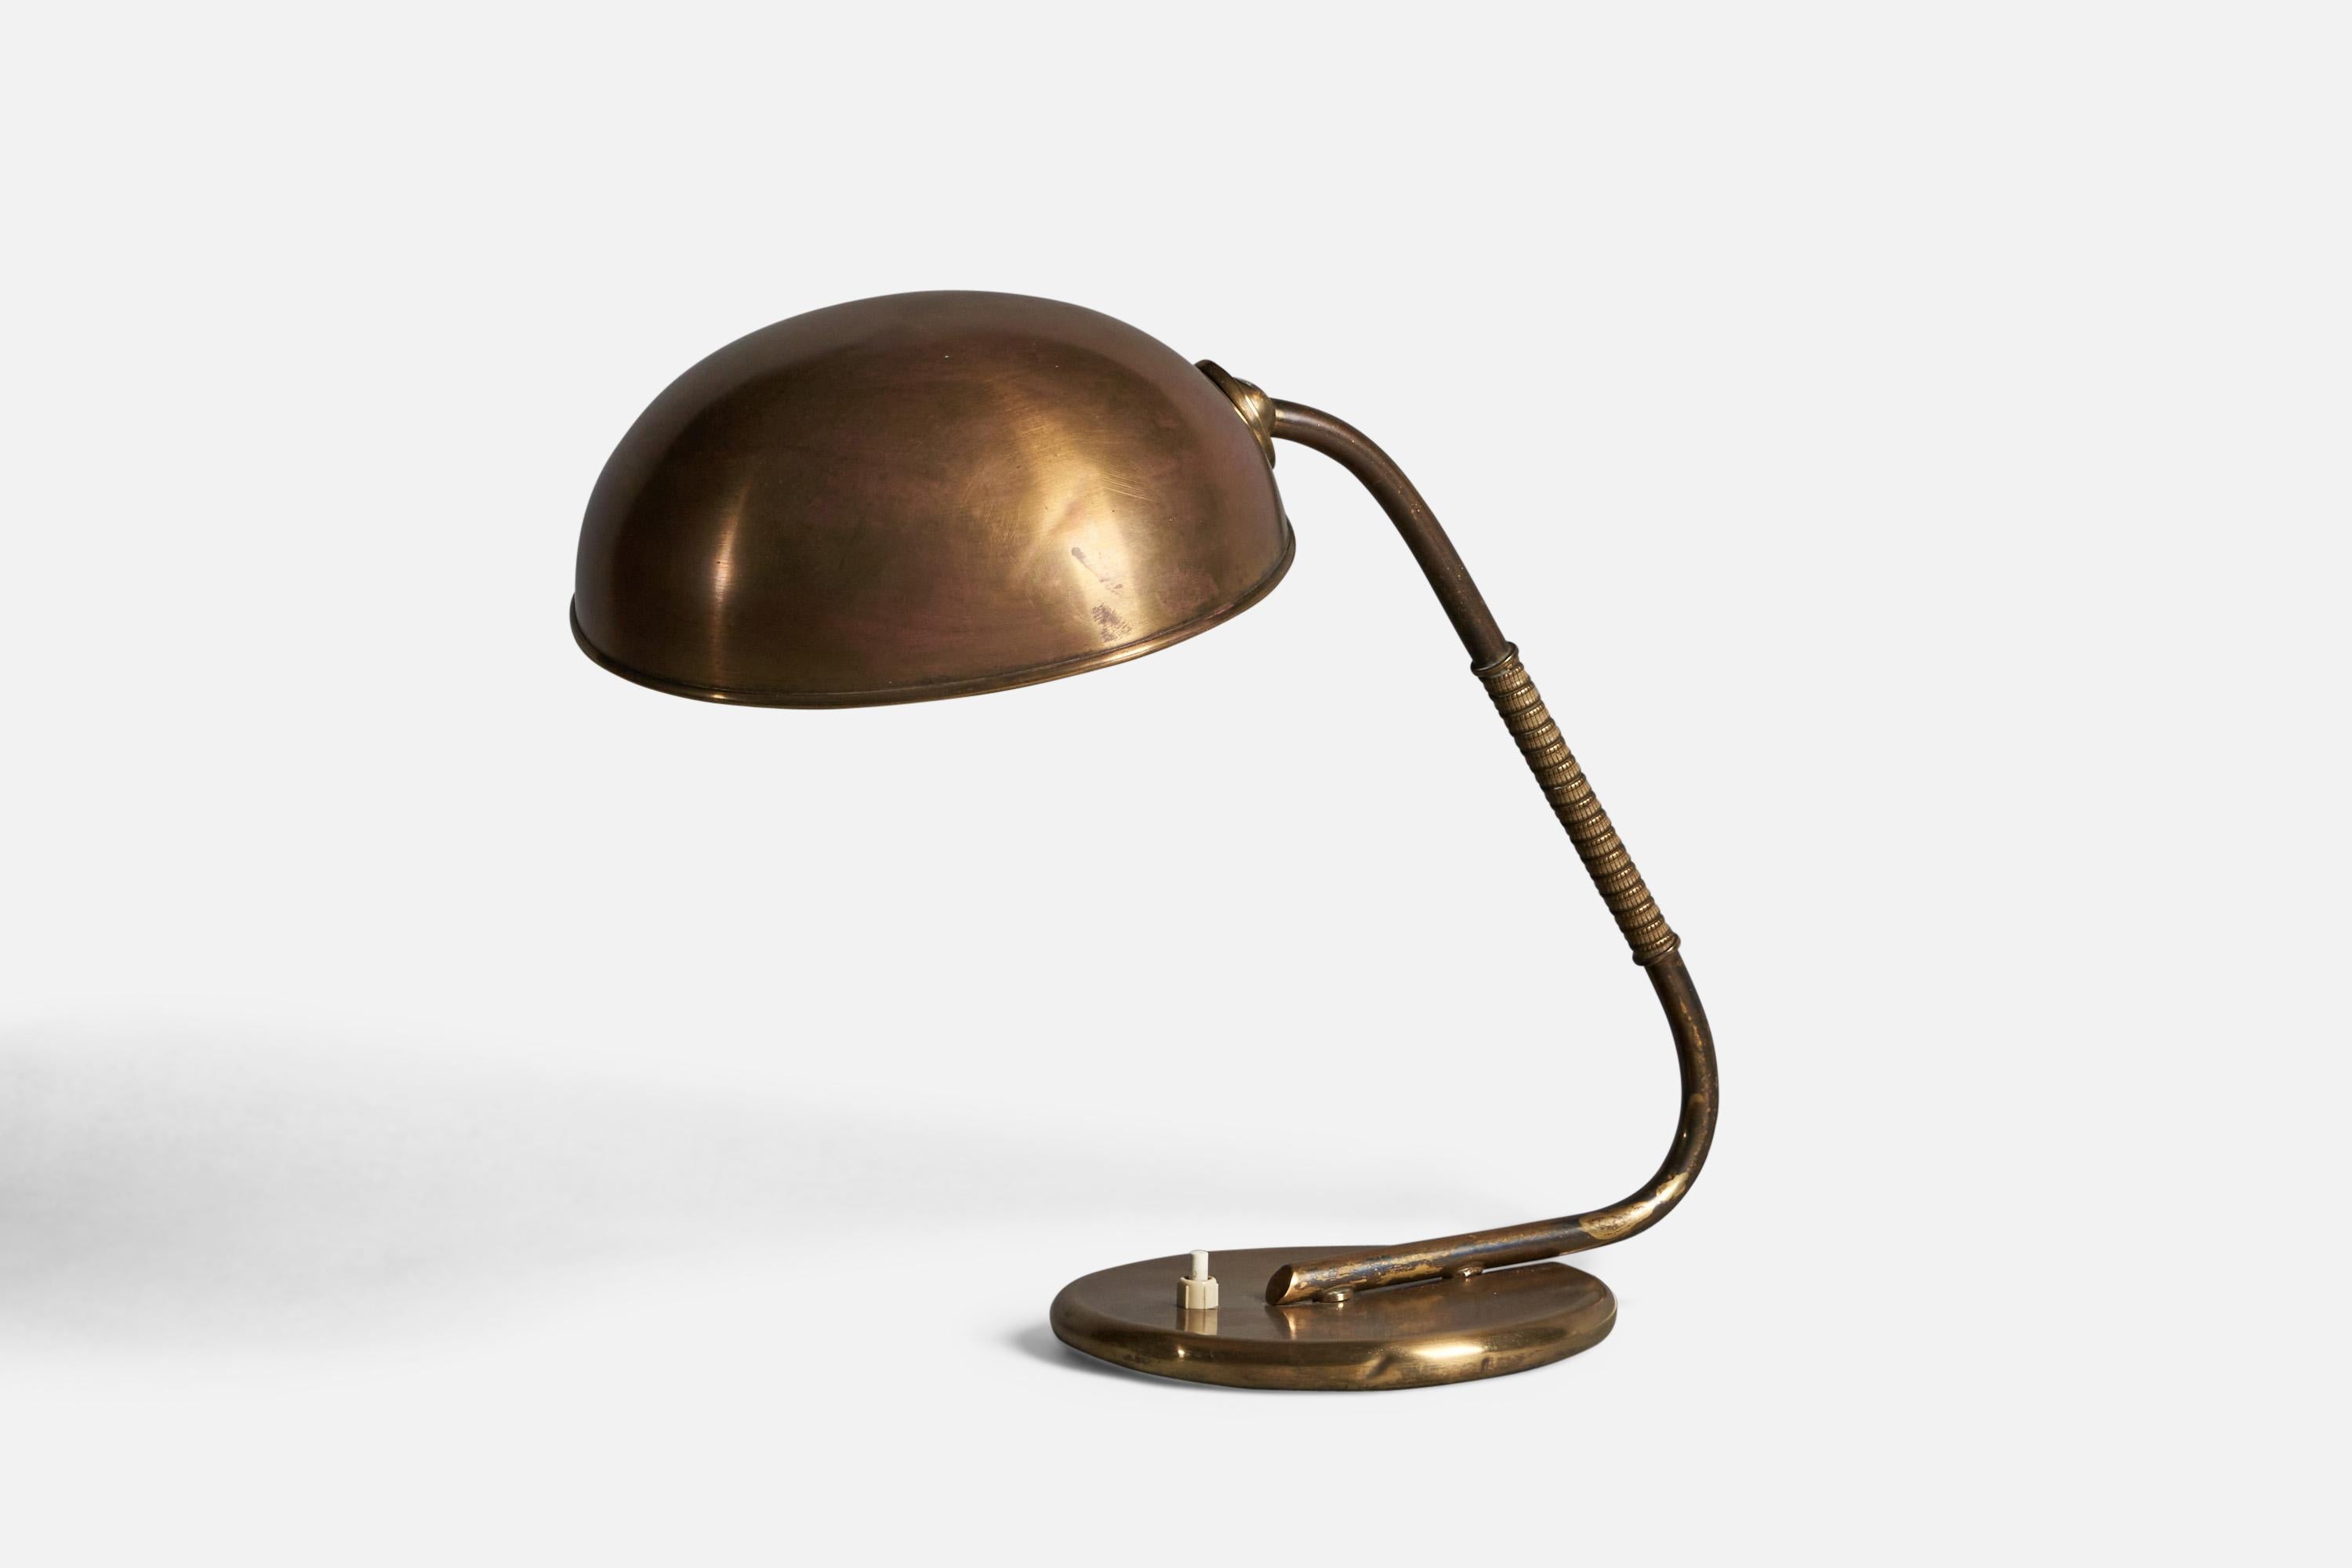 An adjustable brass and metal table lamp, designed and produced in Denmark, c. 1940s.

Overall Dimensions (inches): 14.25